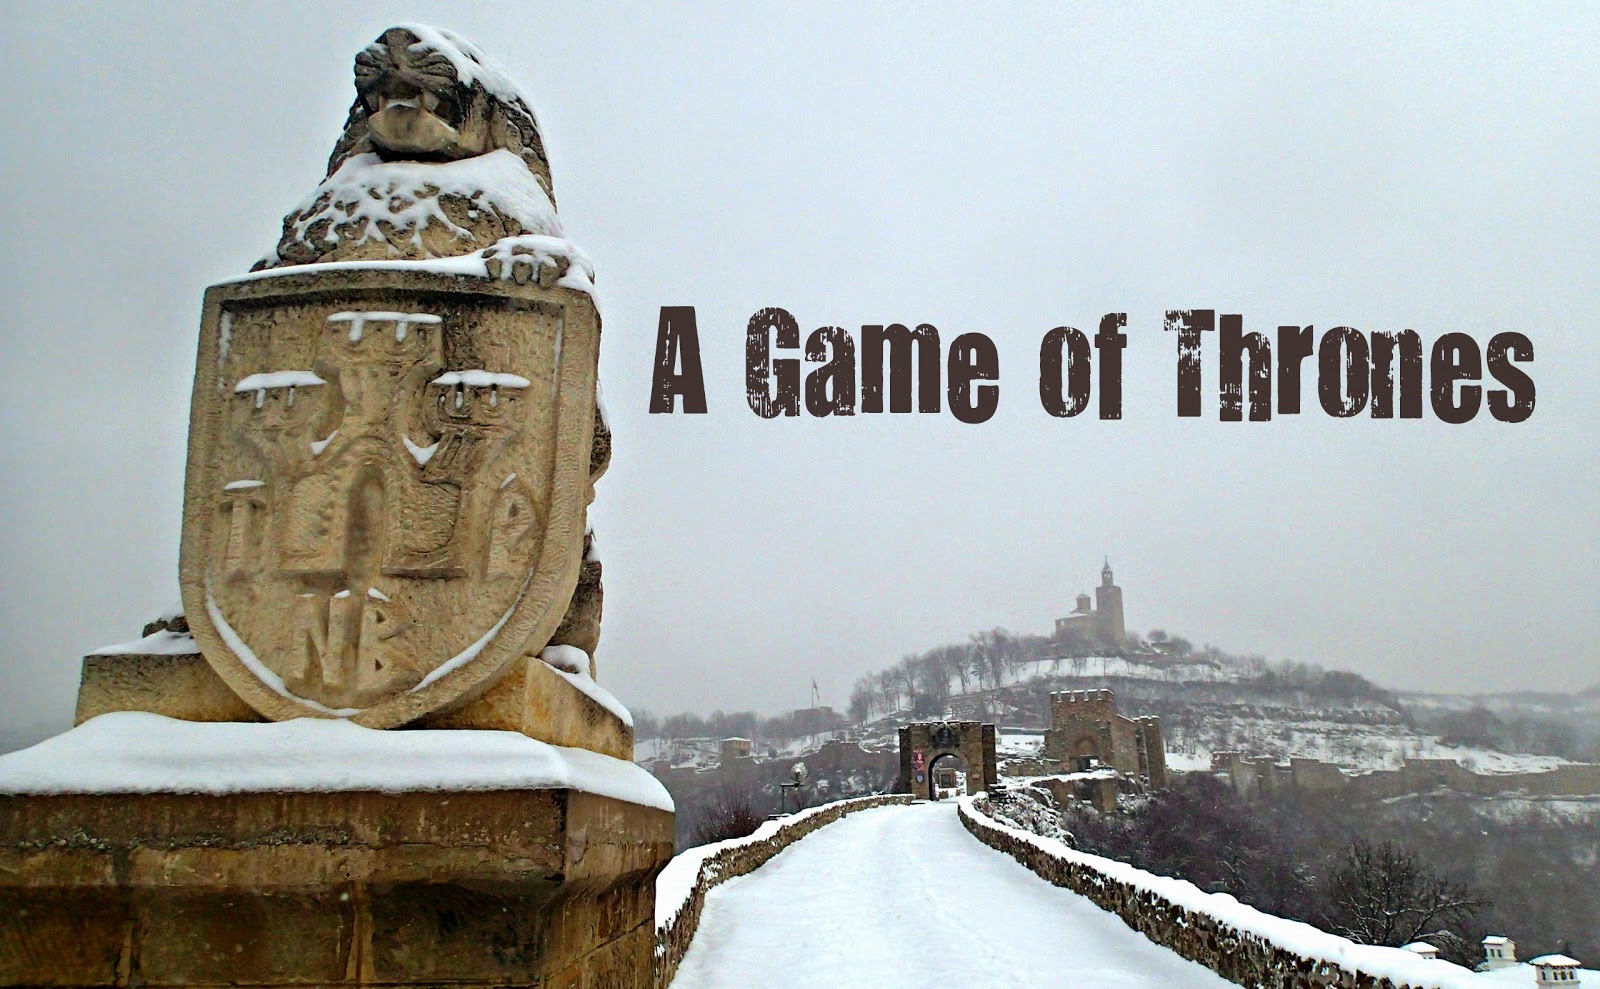 Veliko Tarnovo and a Game of Thrones in Bulgaria